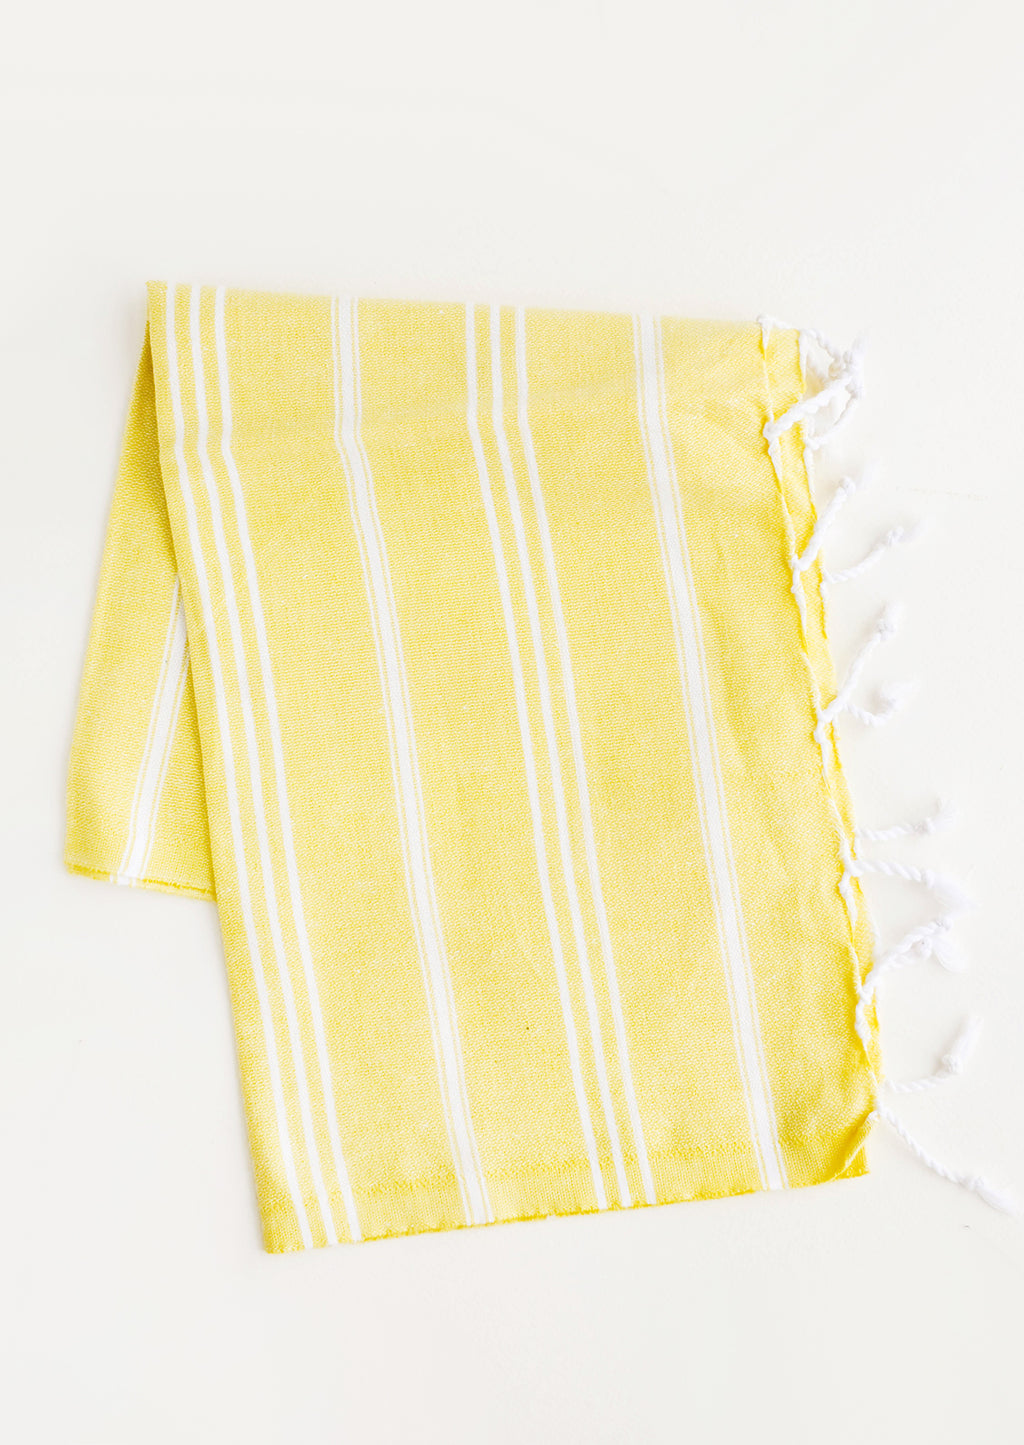 Yellow / Hand Towel: Cotton towel with white stripes in yellow, twisted fringe on ends